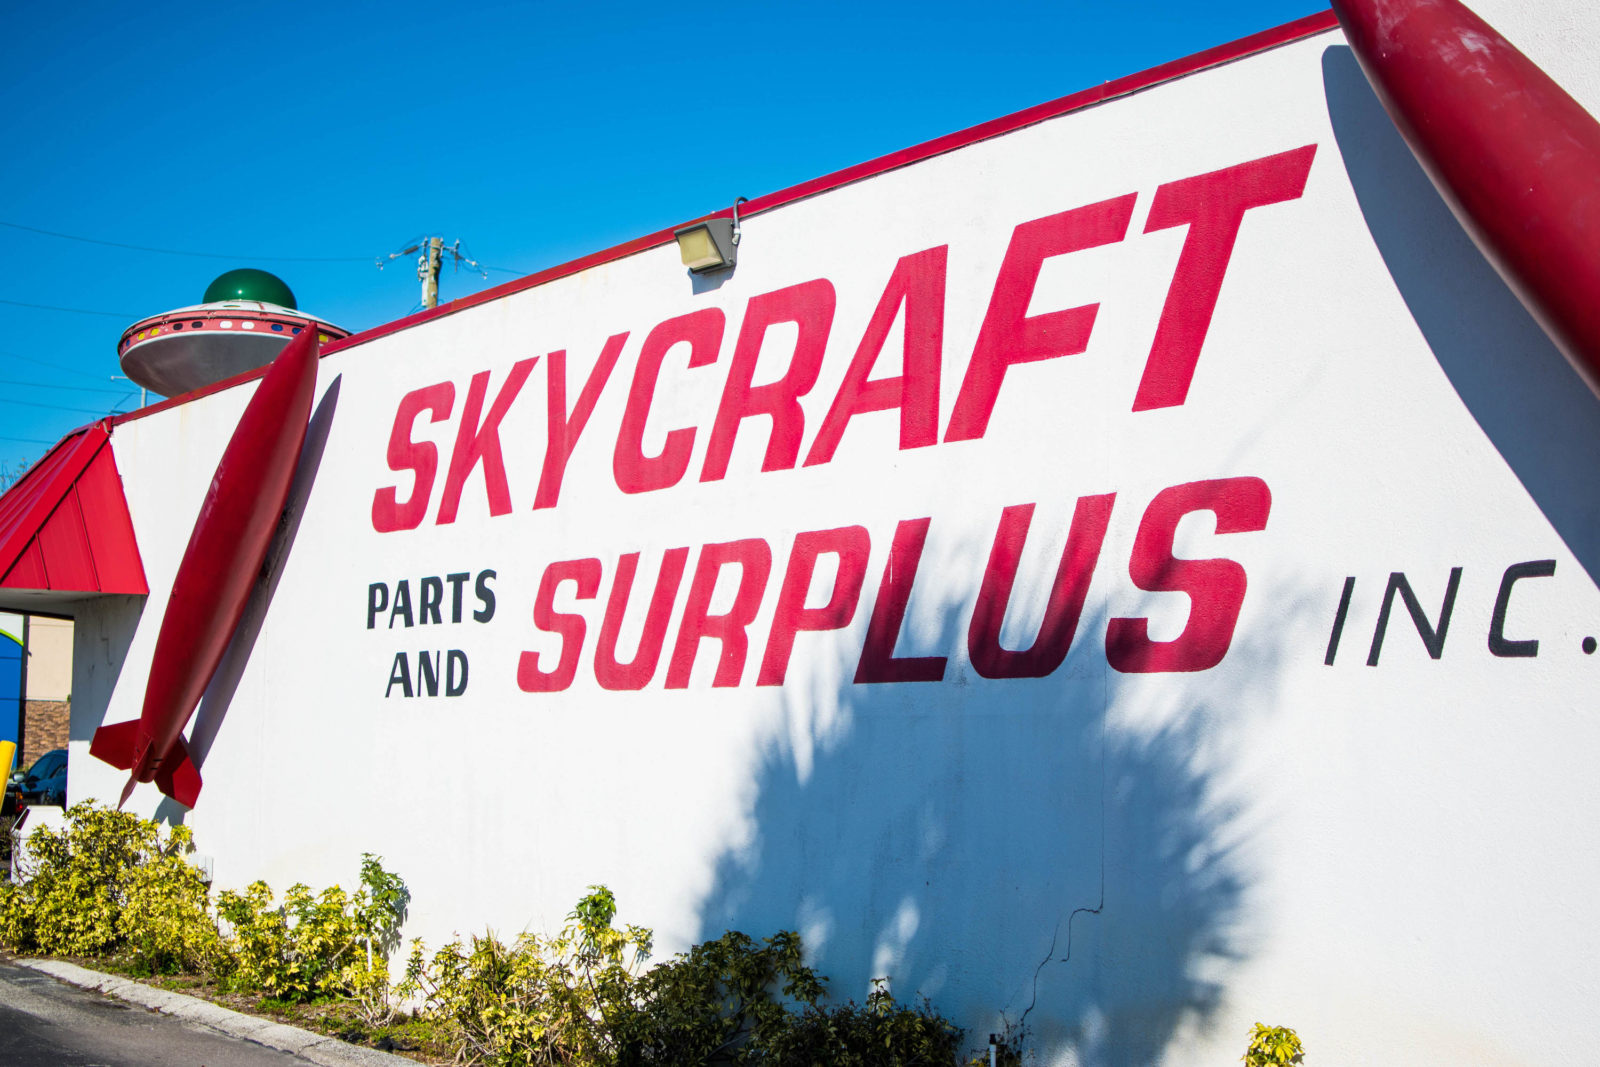 Red Skycraft Parts & Surplus building sign.